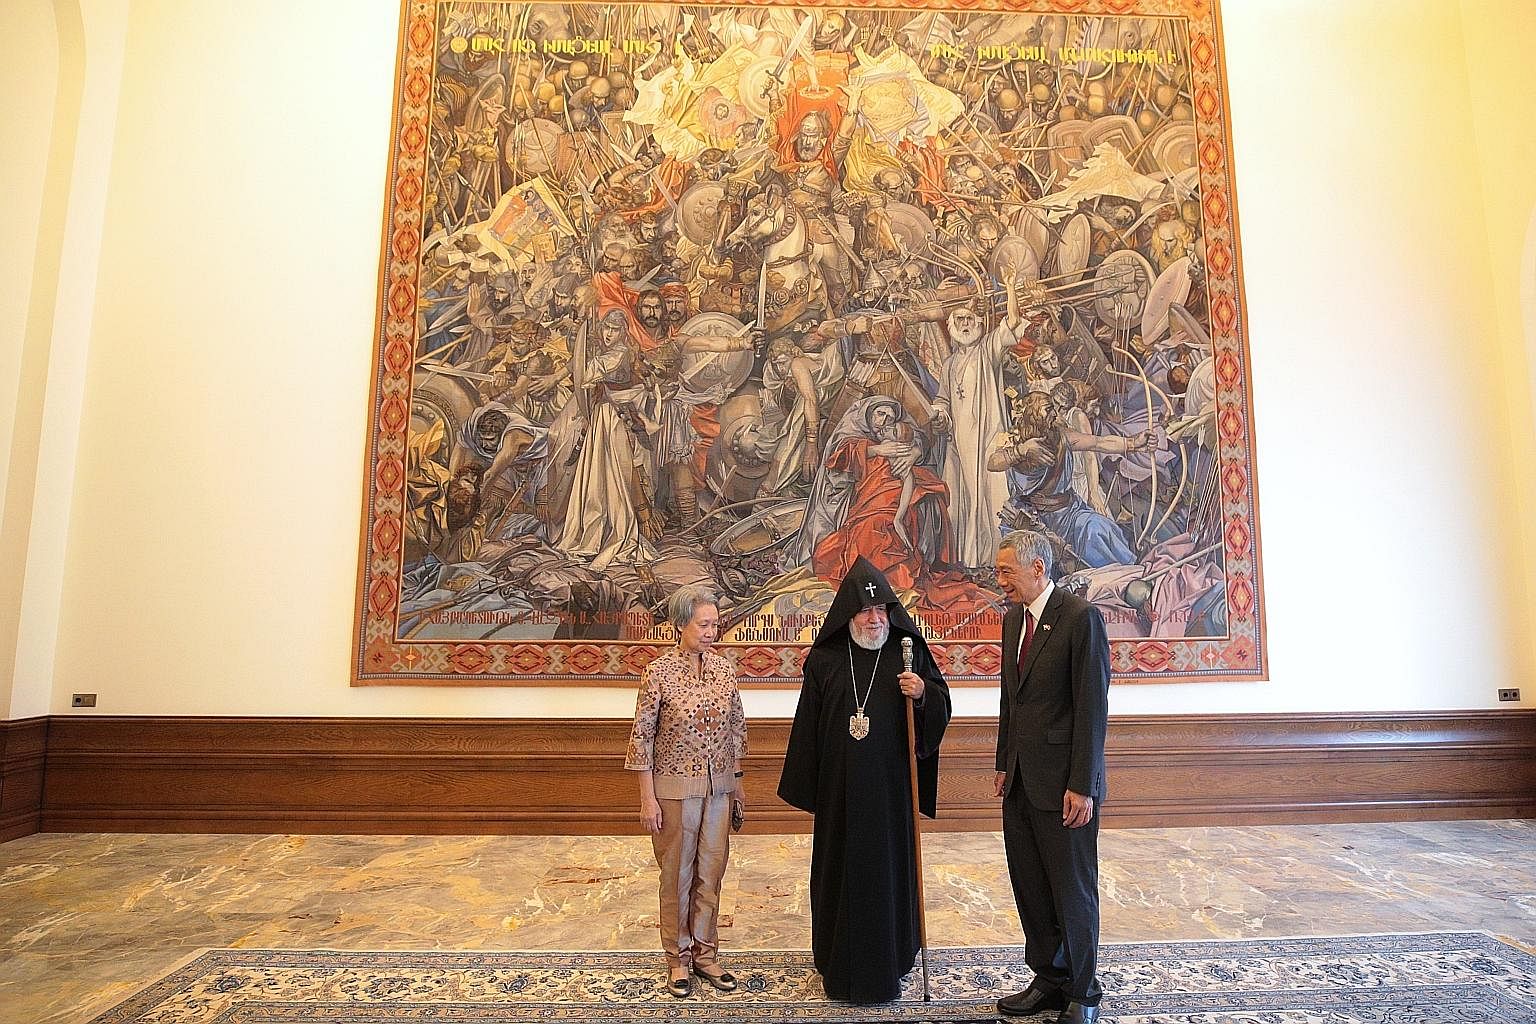 Prime Minister Lee Hsien Loong and Mrs Lee meeting Supreme Patriarch and Catholicos His Holiness Karekin II in his residence yesterday at the Mother See of Holy Etchmiadzin in Armenia, where PM Lee is on an official visit. Behind them is a reproducti